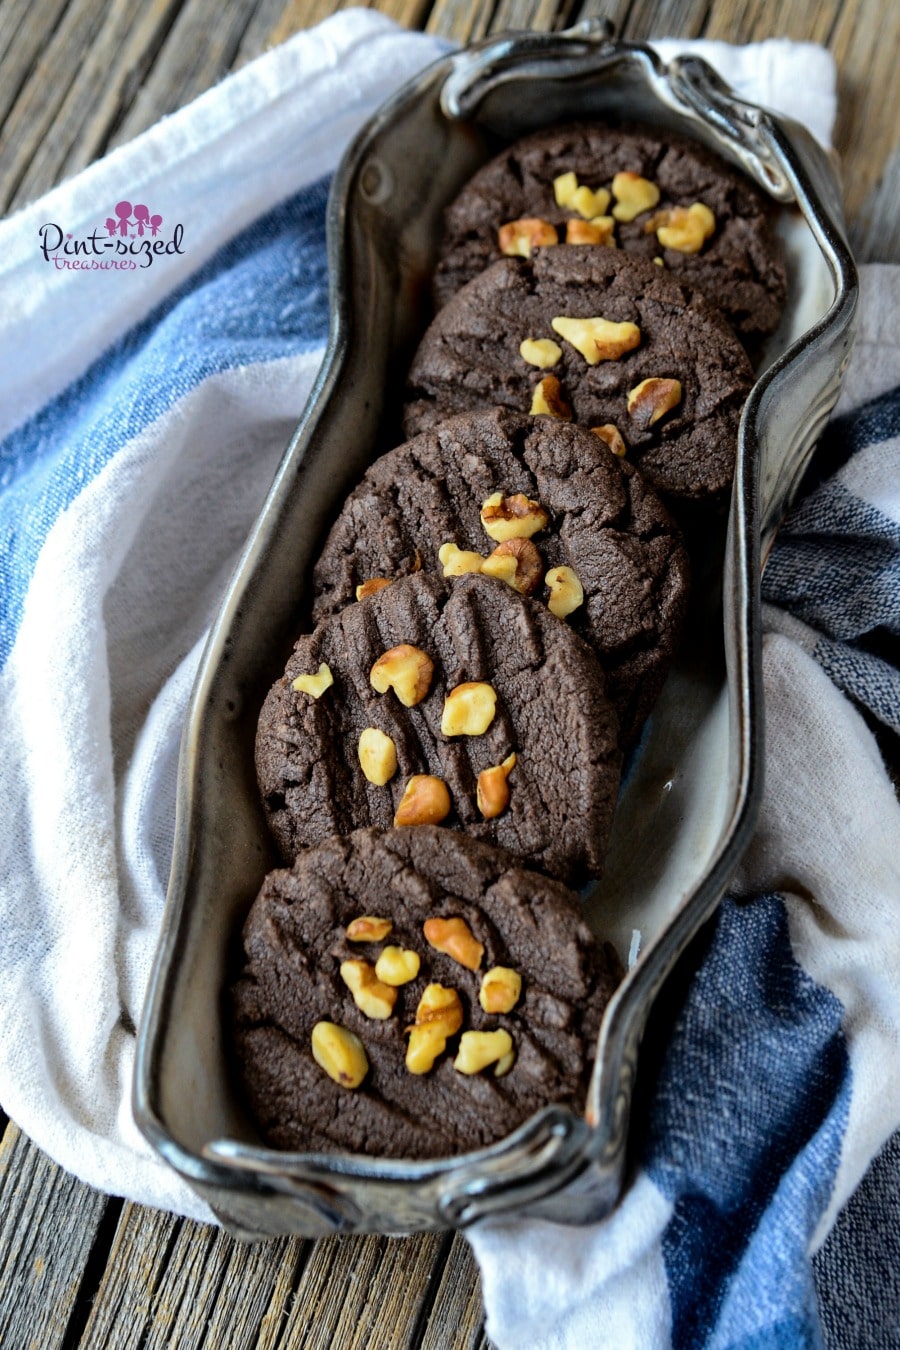 Ooh! Love these super-easy chocolate pecan cookies that are ready from prep to finish in minutes!